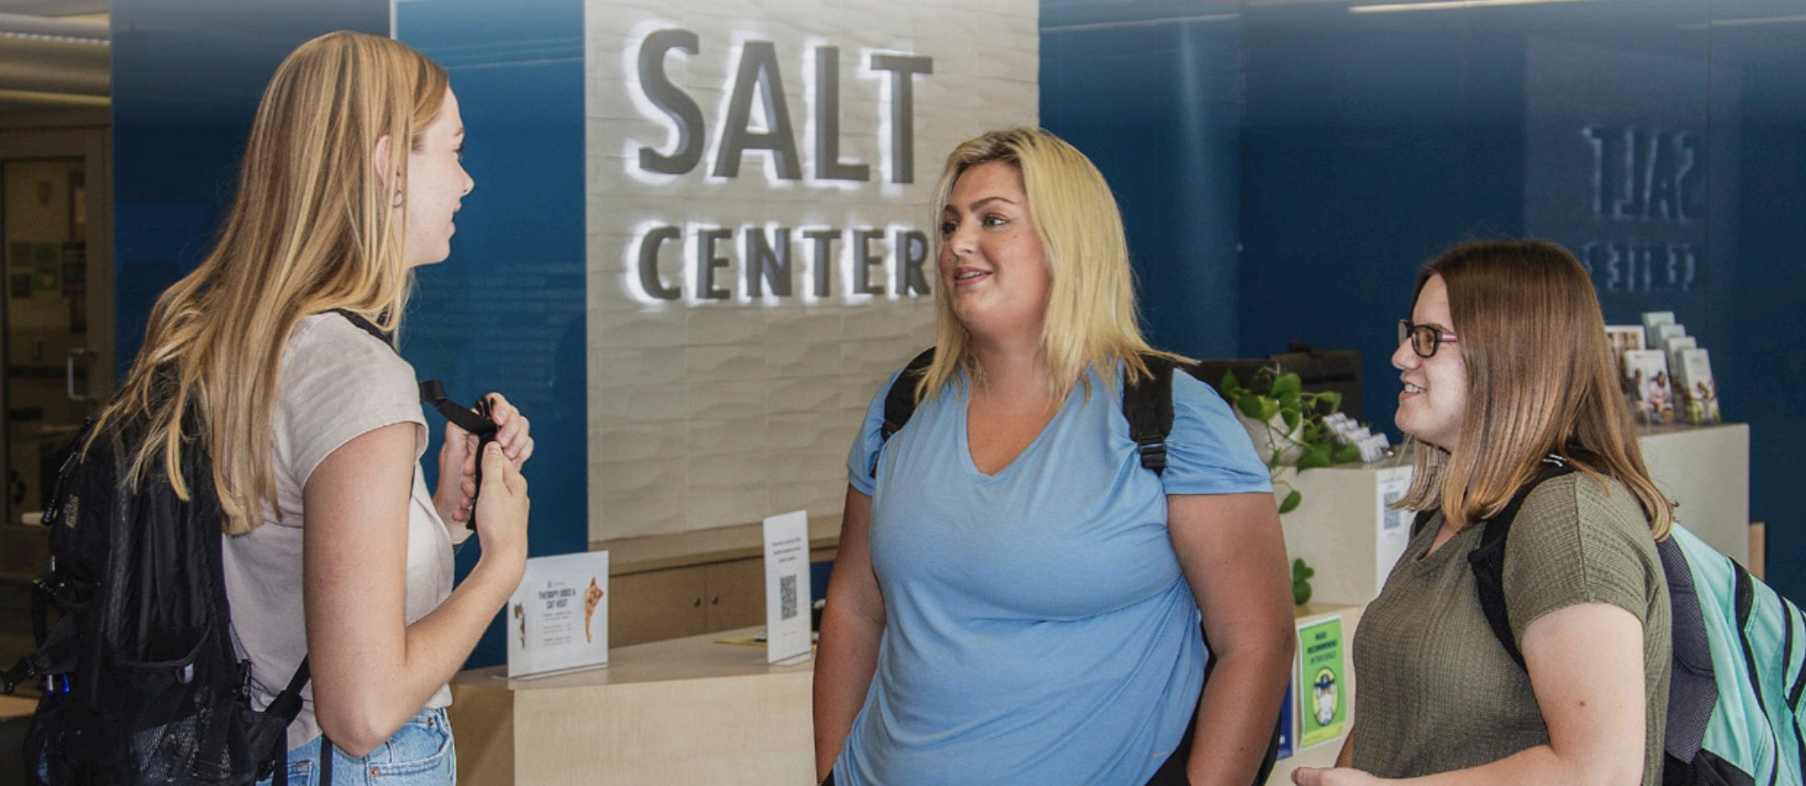 3 students standing in the SALT Center lobby